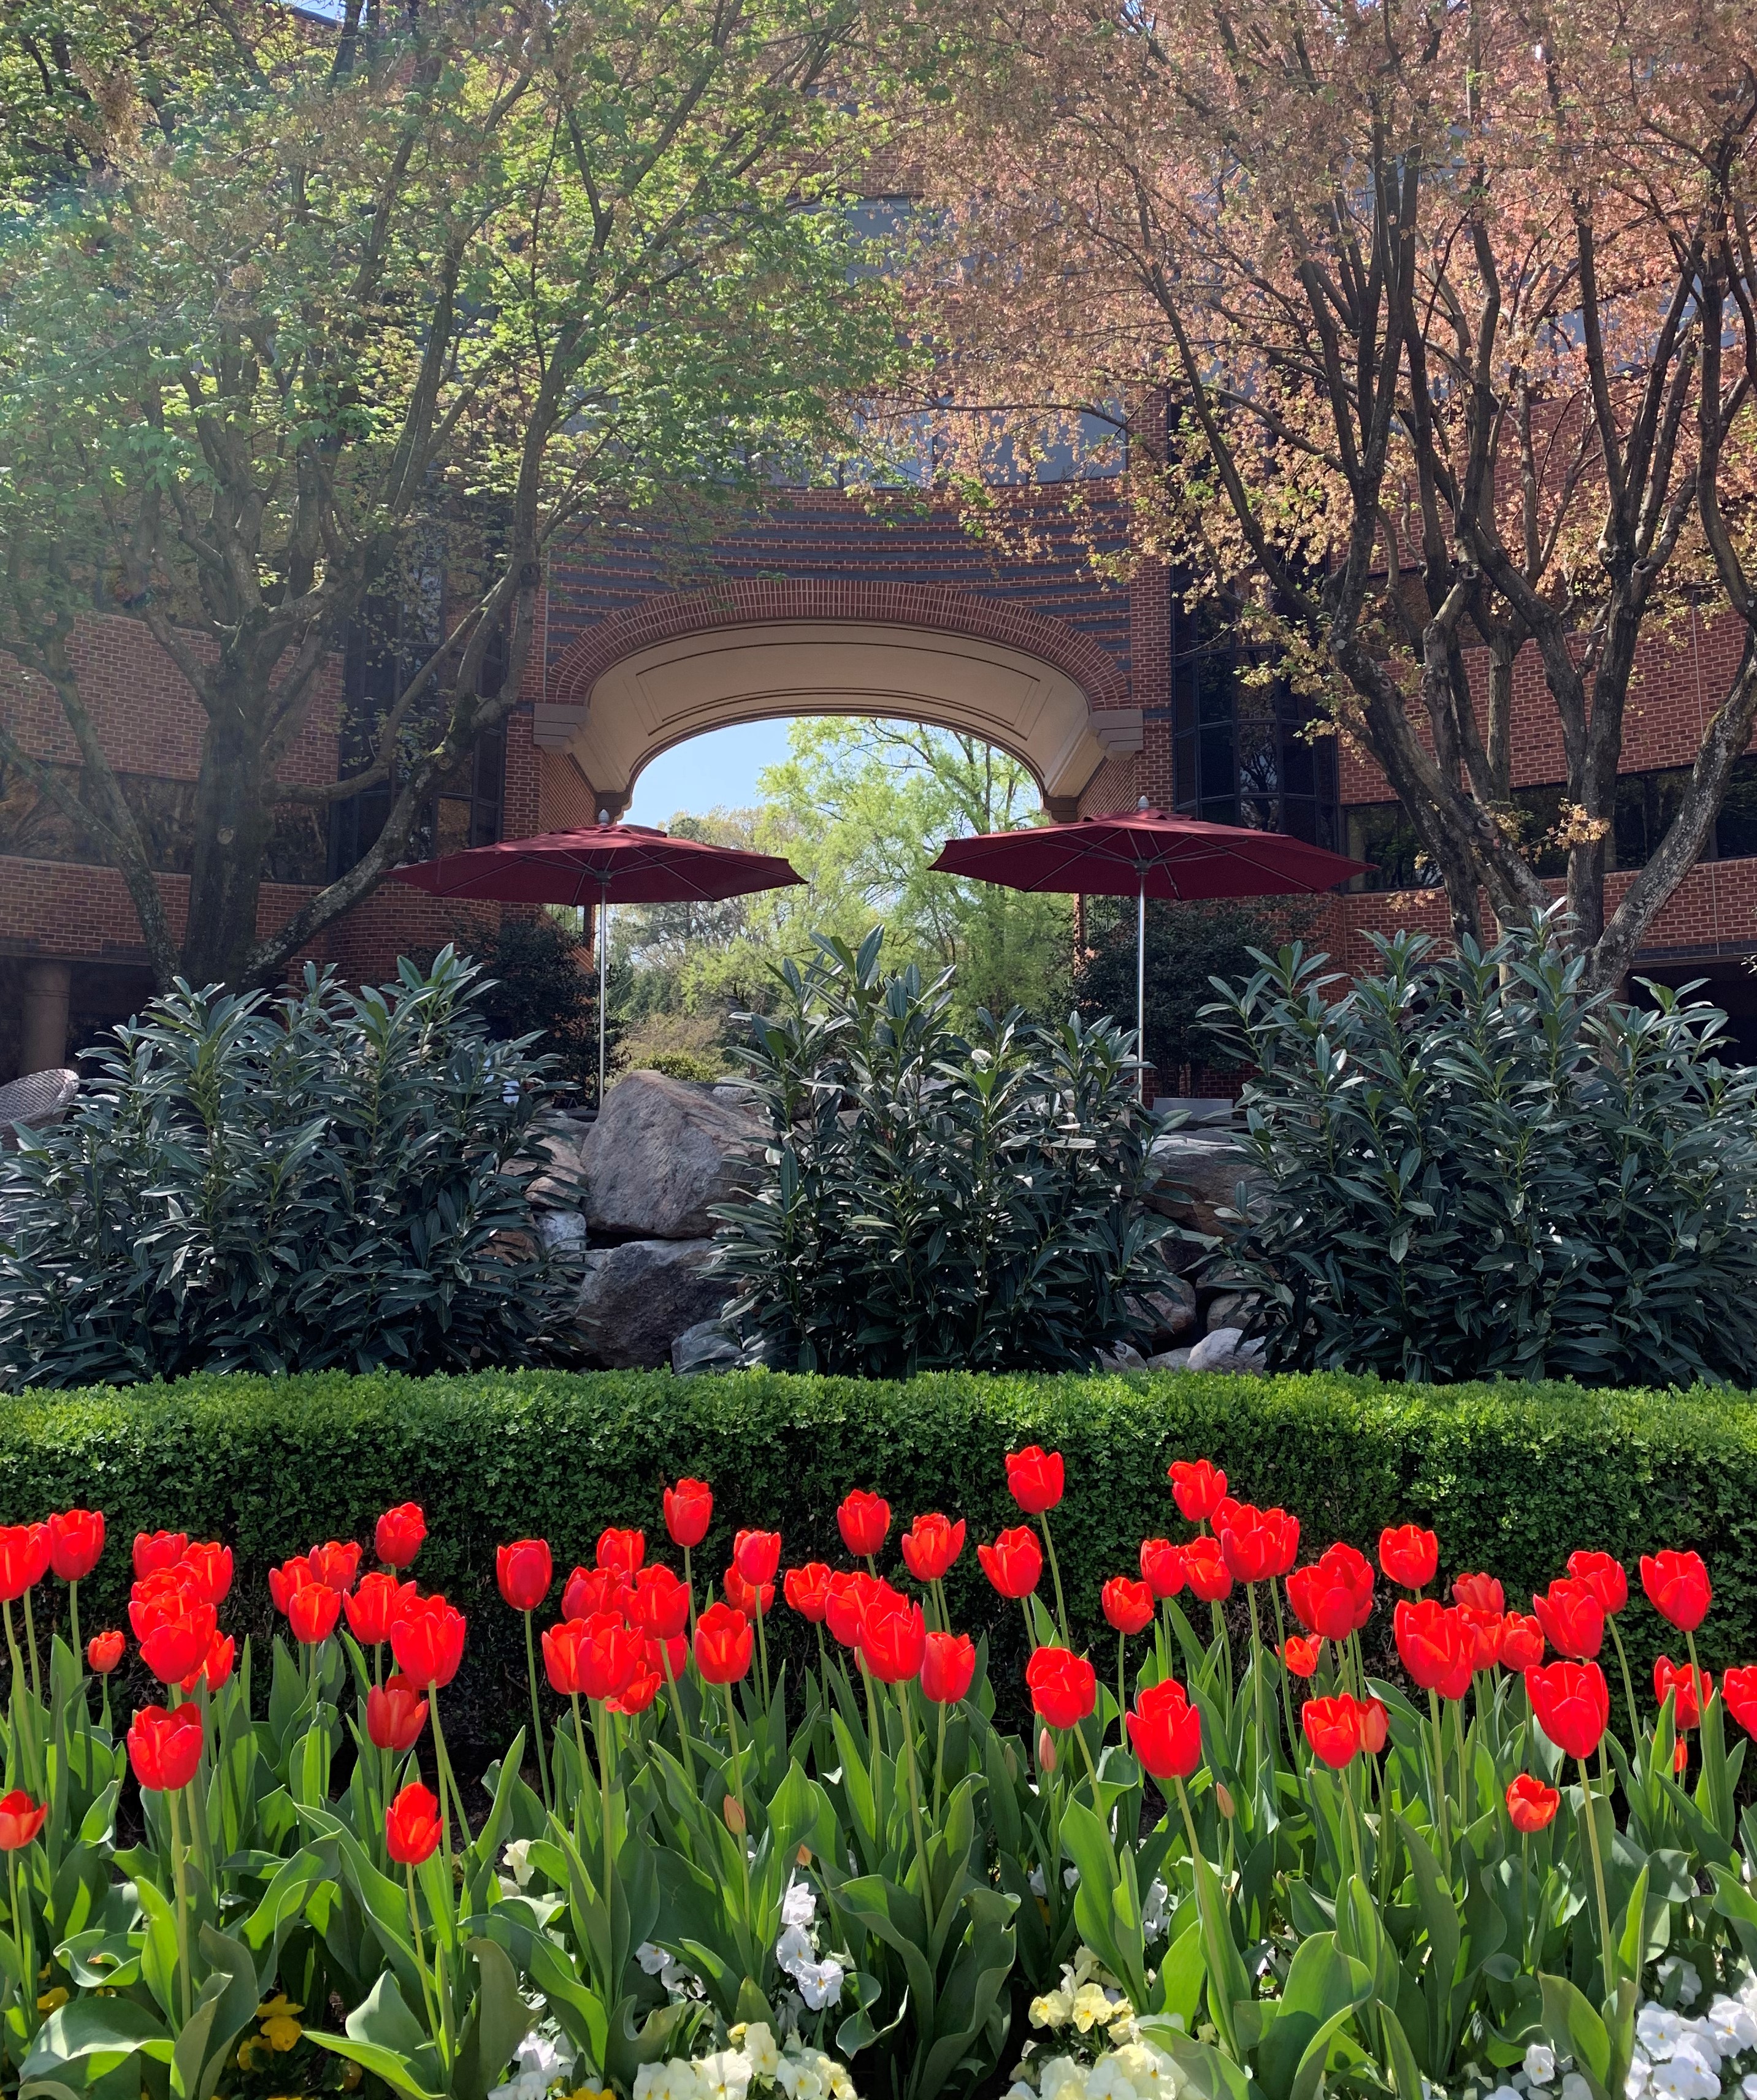 Red tulips in the courtyard of the Landmark building